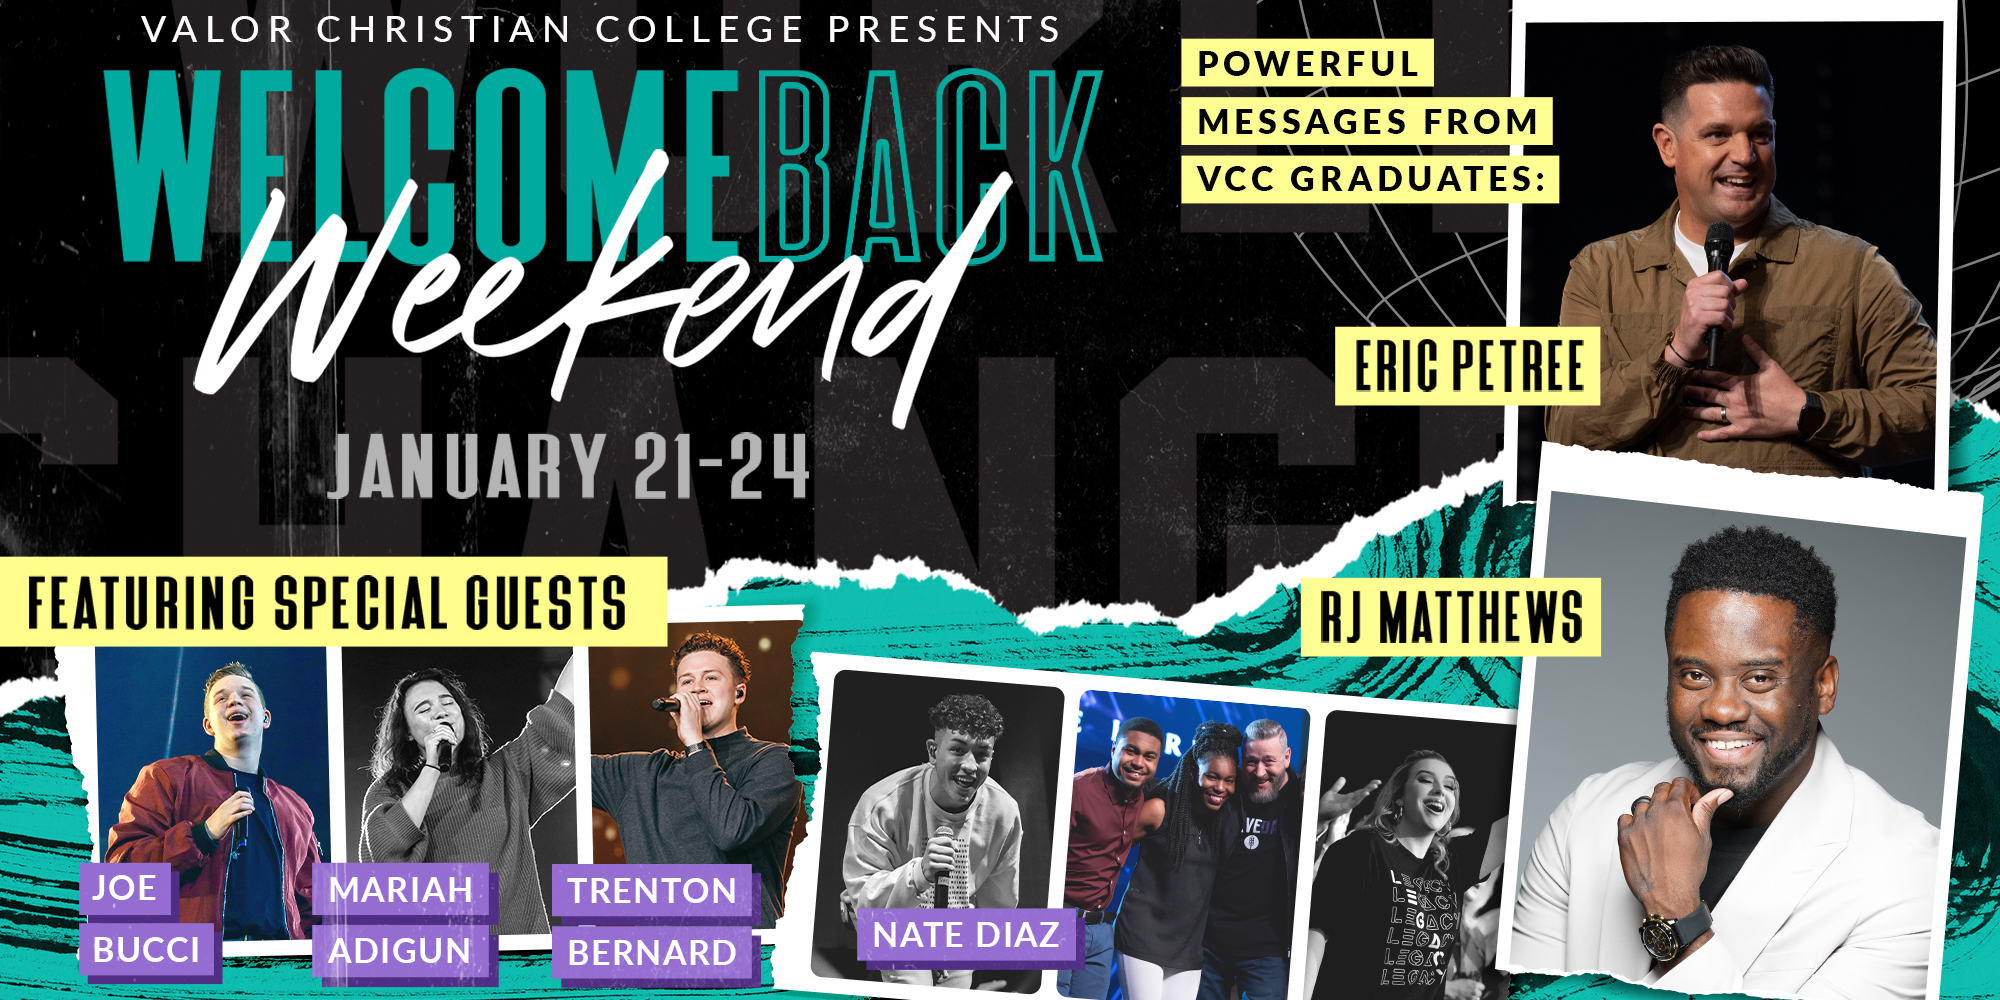 Valor Christian College Presents WelcomeBack Weekend January 21-24 Powerful Messages from VCC Graduates: Eric Petree and Rj Matthews Featuring Special Guests Joe Bucci, Mariah Adigun, Trenton Bernard, and Nate Diaz.